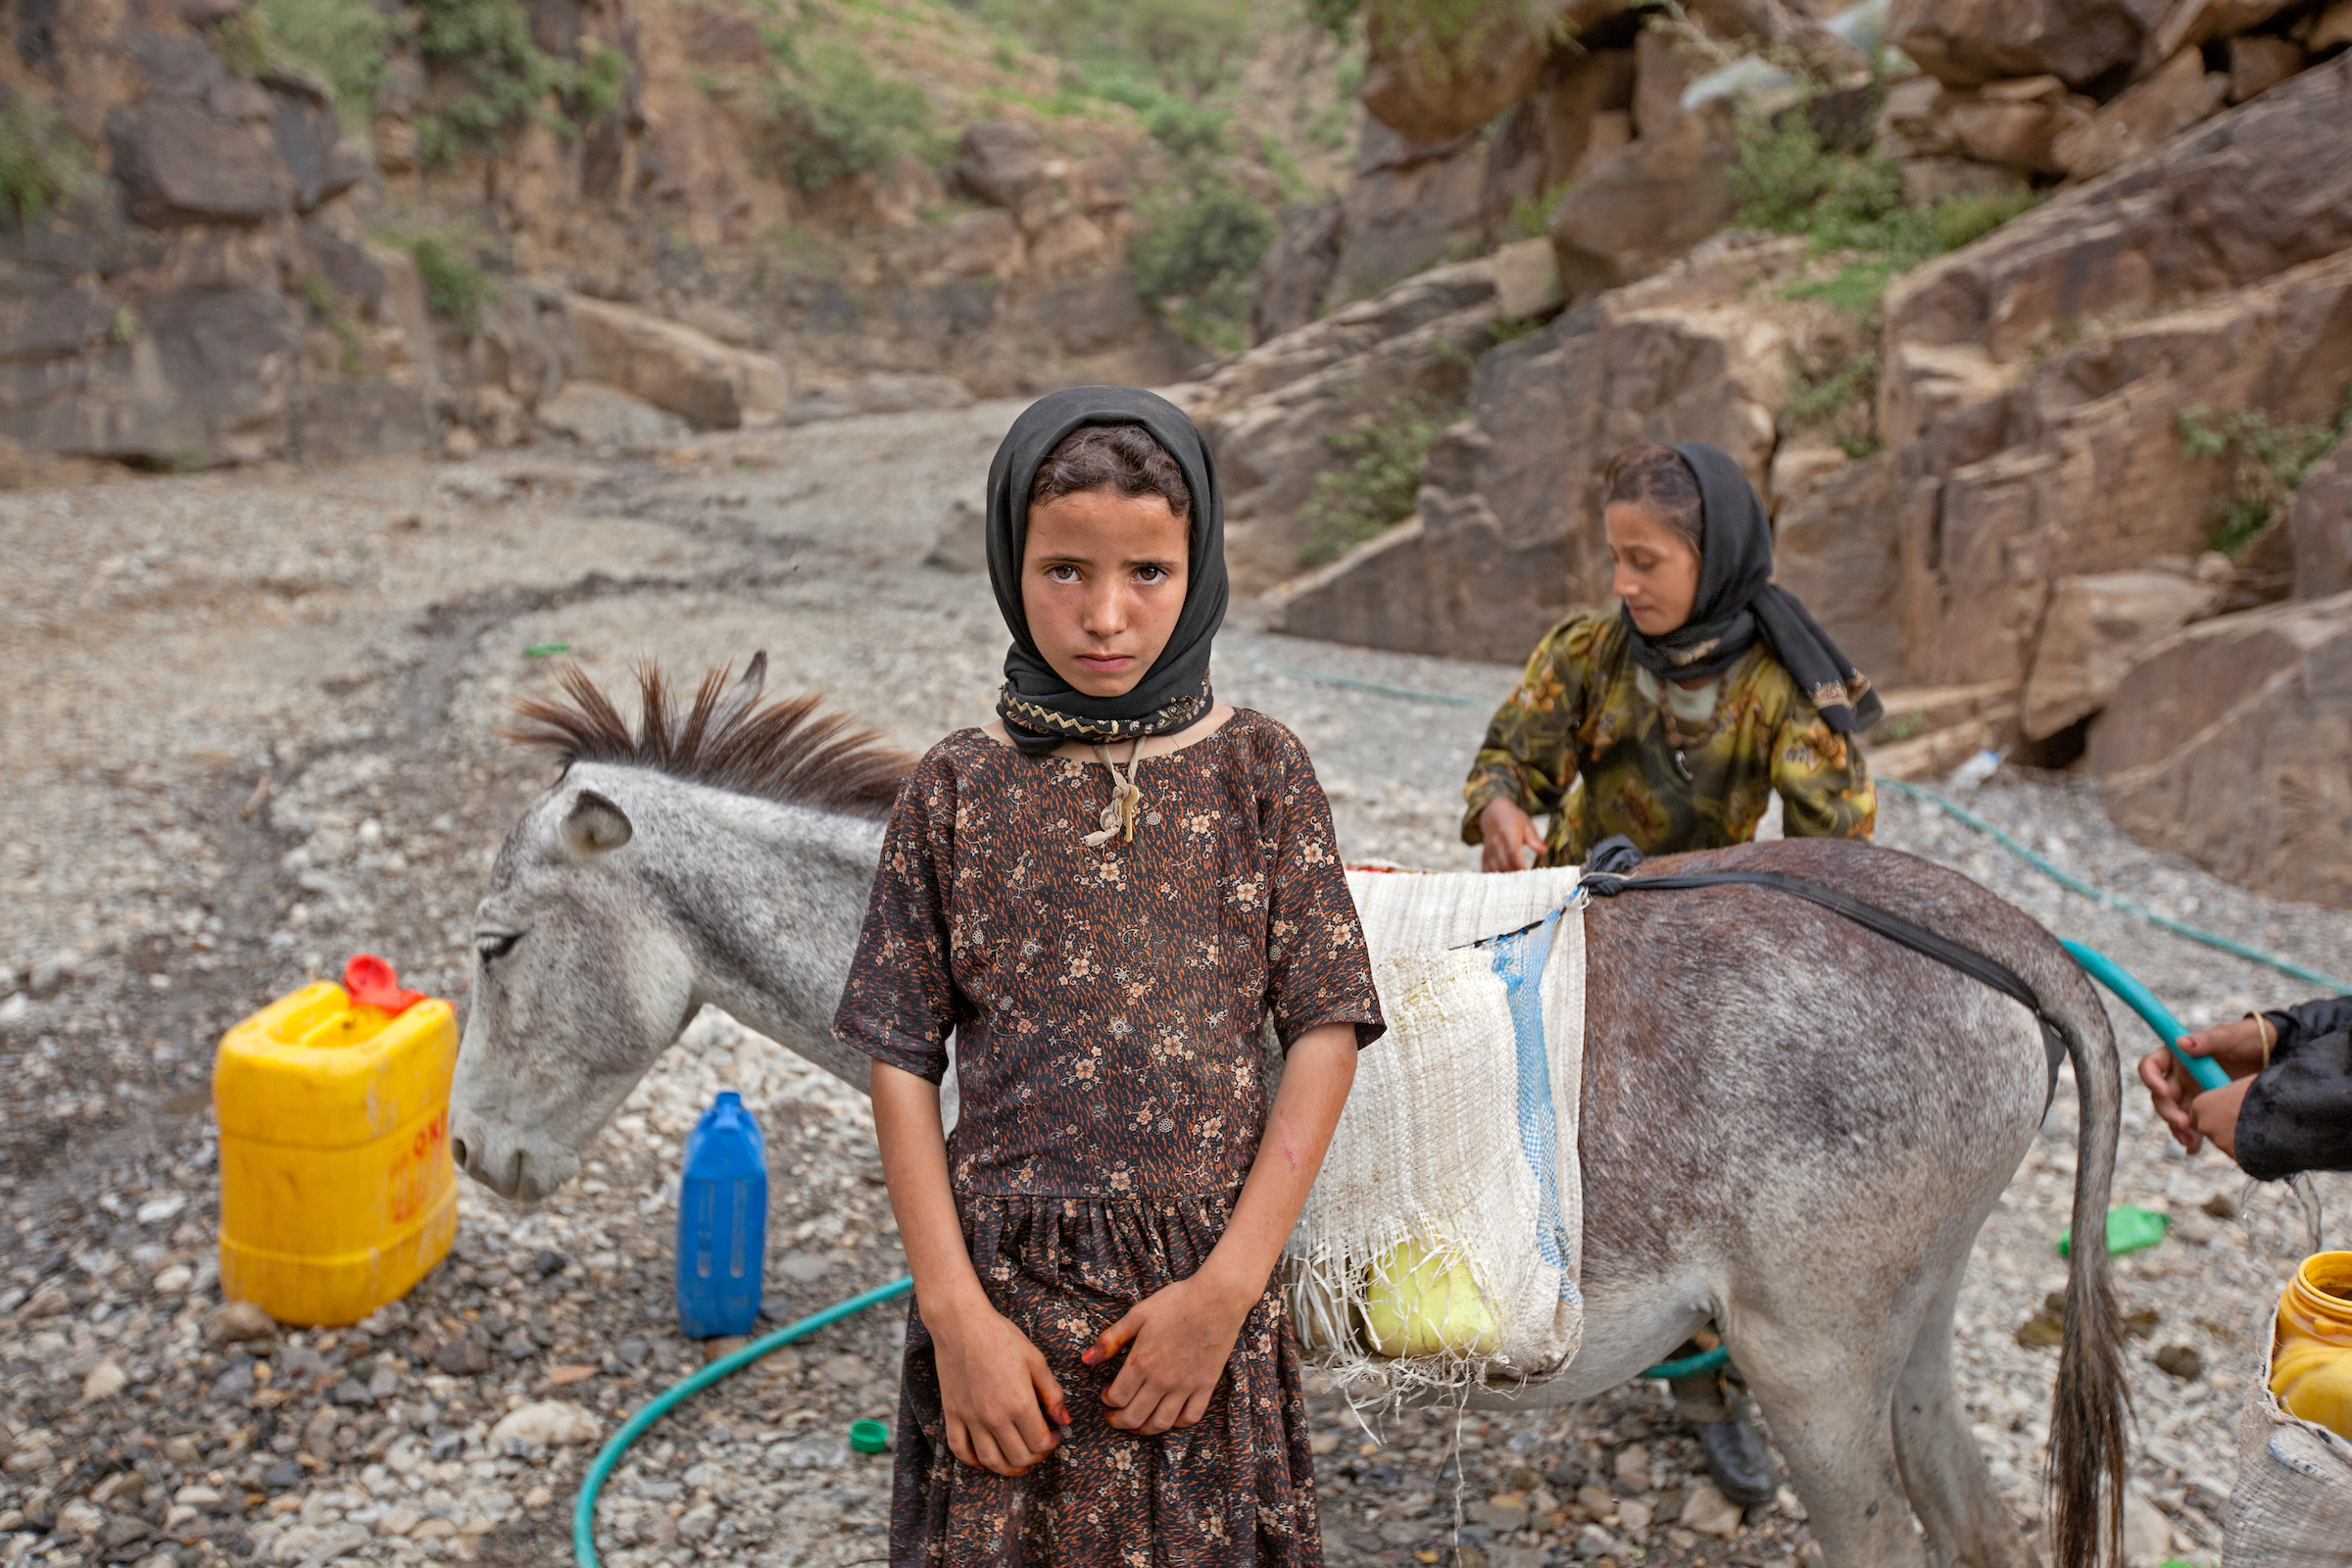 Tehani, 8, works in the fields just outside her village in the rural areas of Hajjah, Yemen.